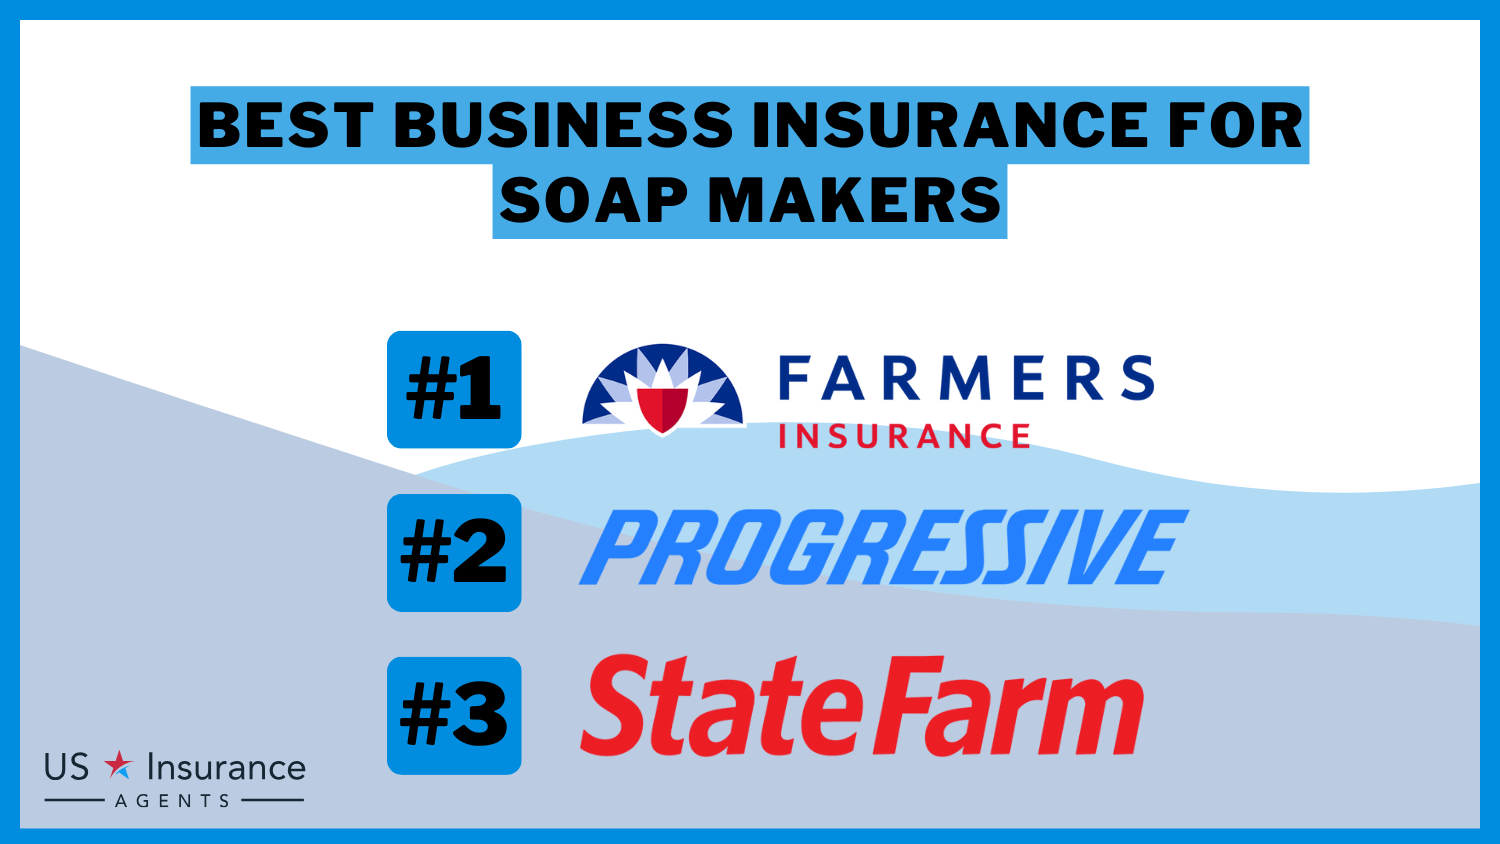 3 Best Business Insurance for Soap Makers: Farmers, Progressive, and State Farm.